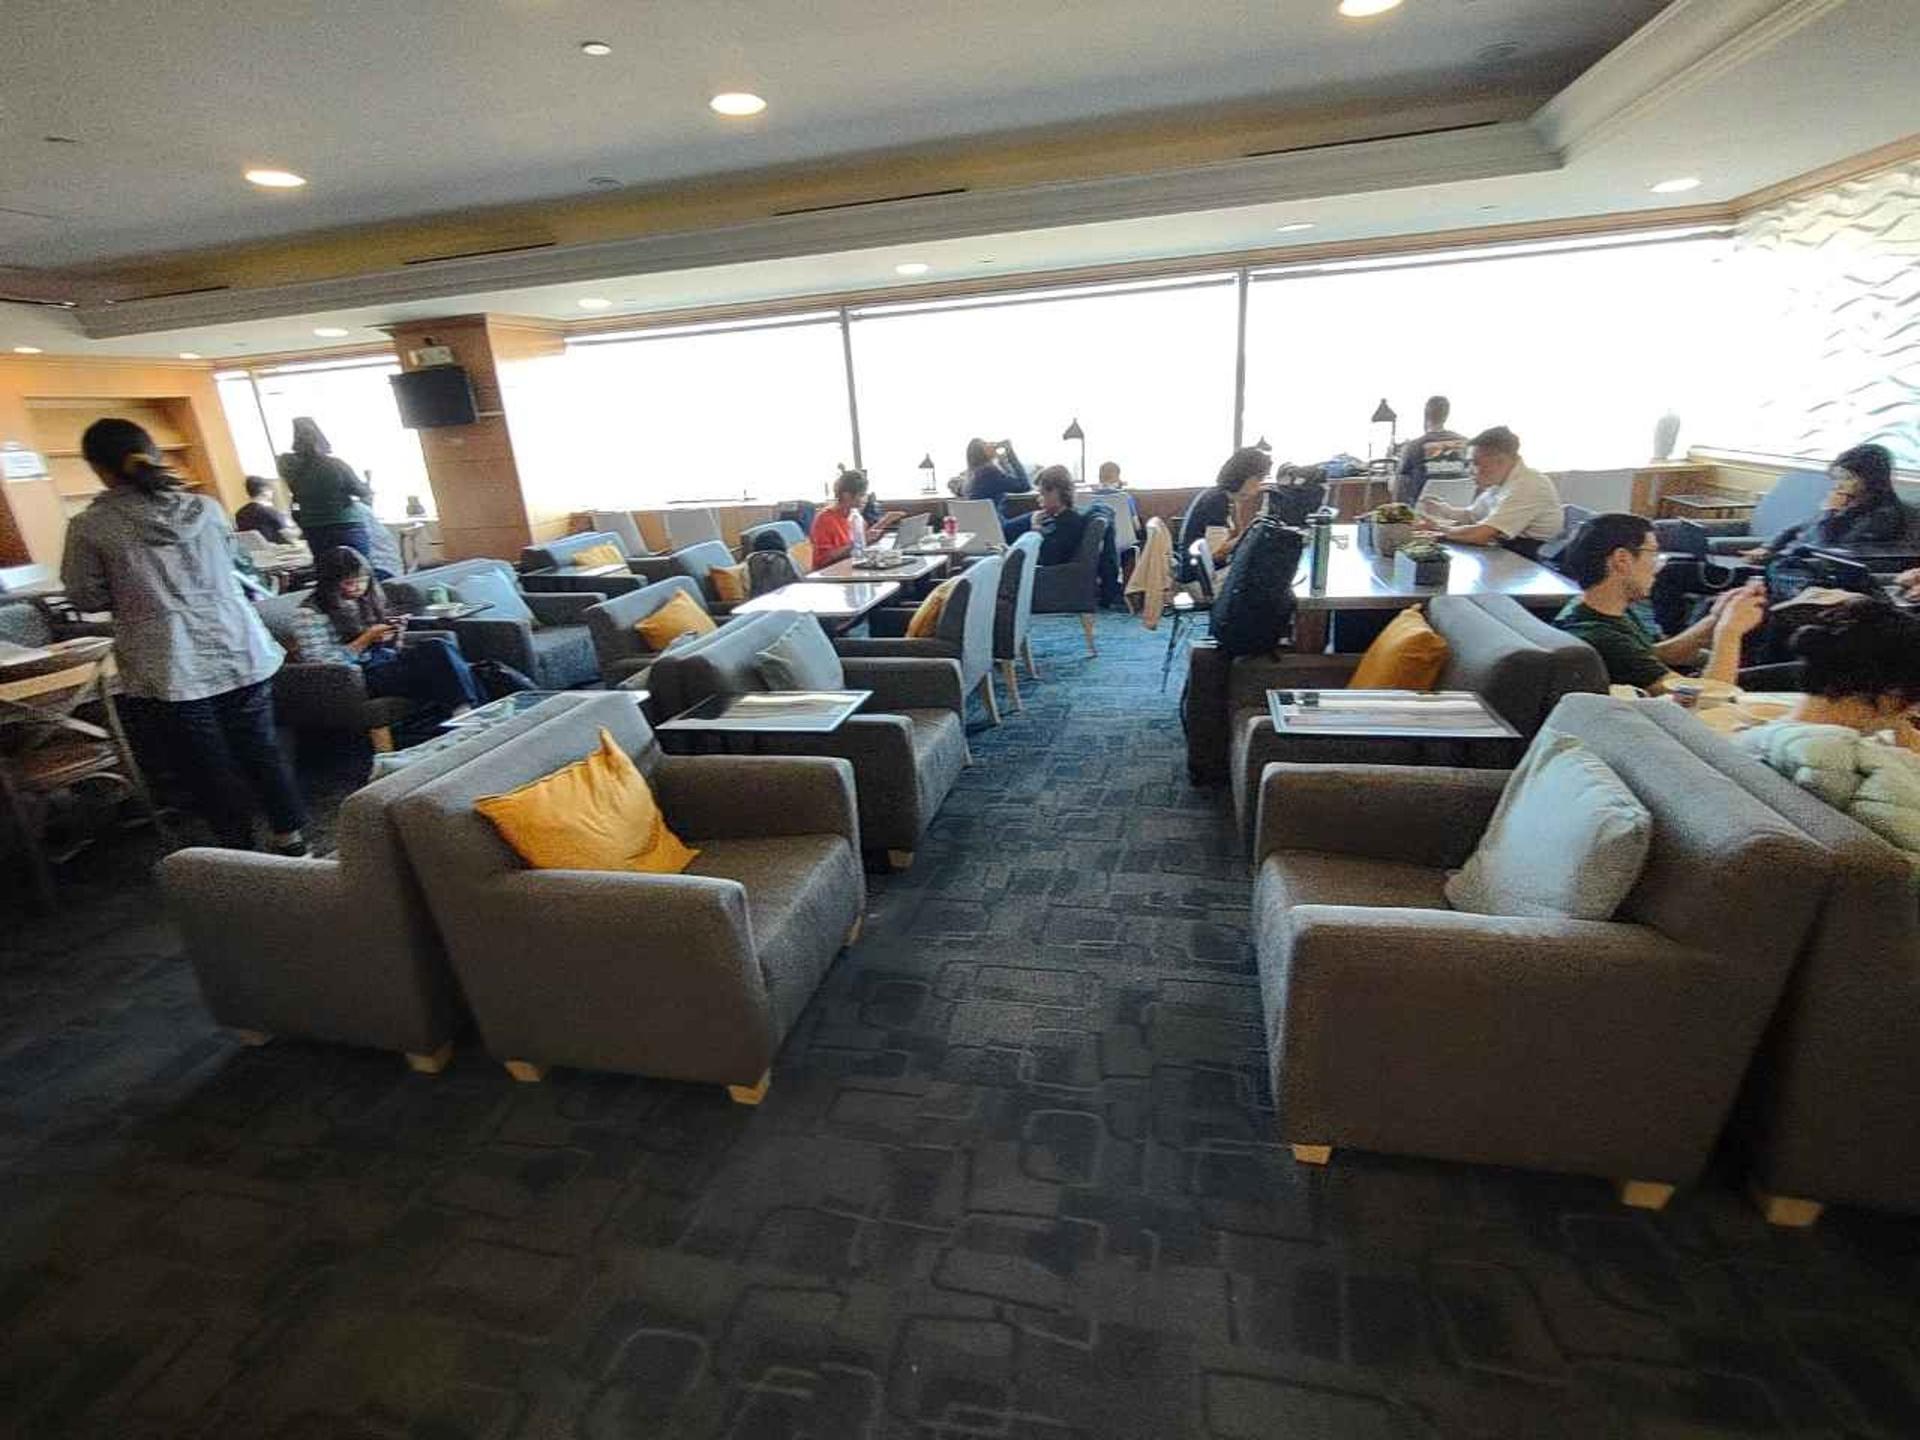 China Airlines Dynasty Lounge image 25 of 34